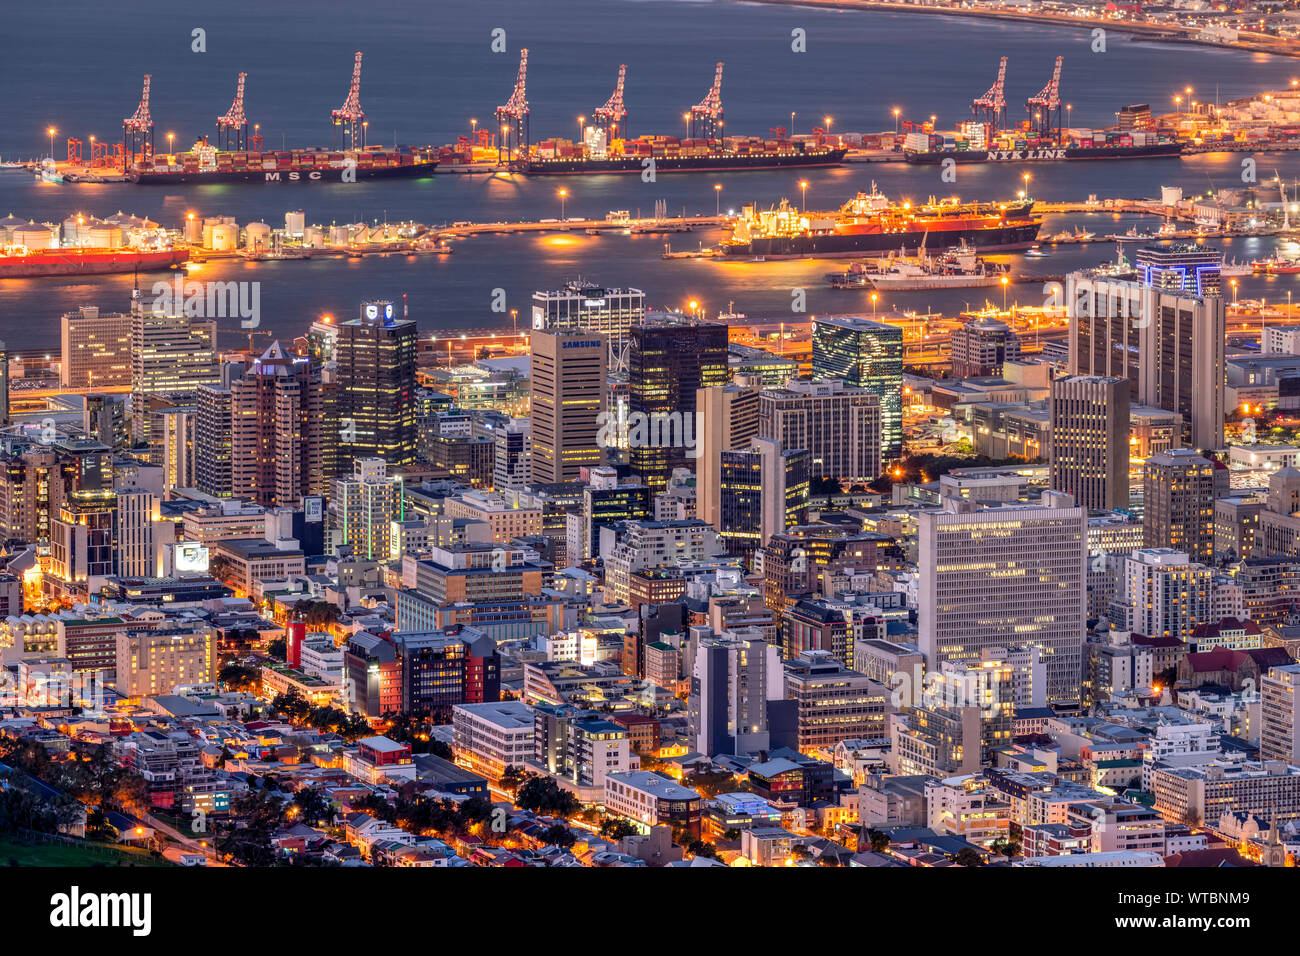 City skyline and harbor at dusk, Cape Town, Western Cape, South Africa Stock Photo